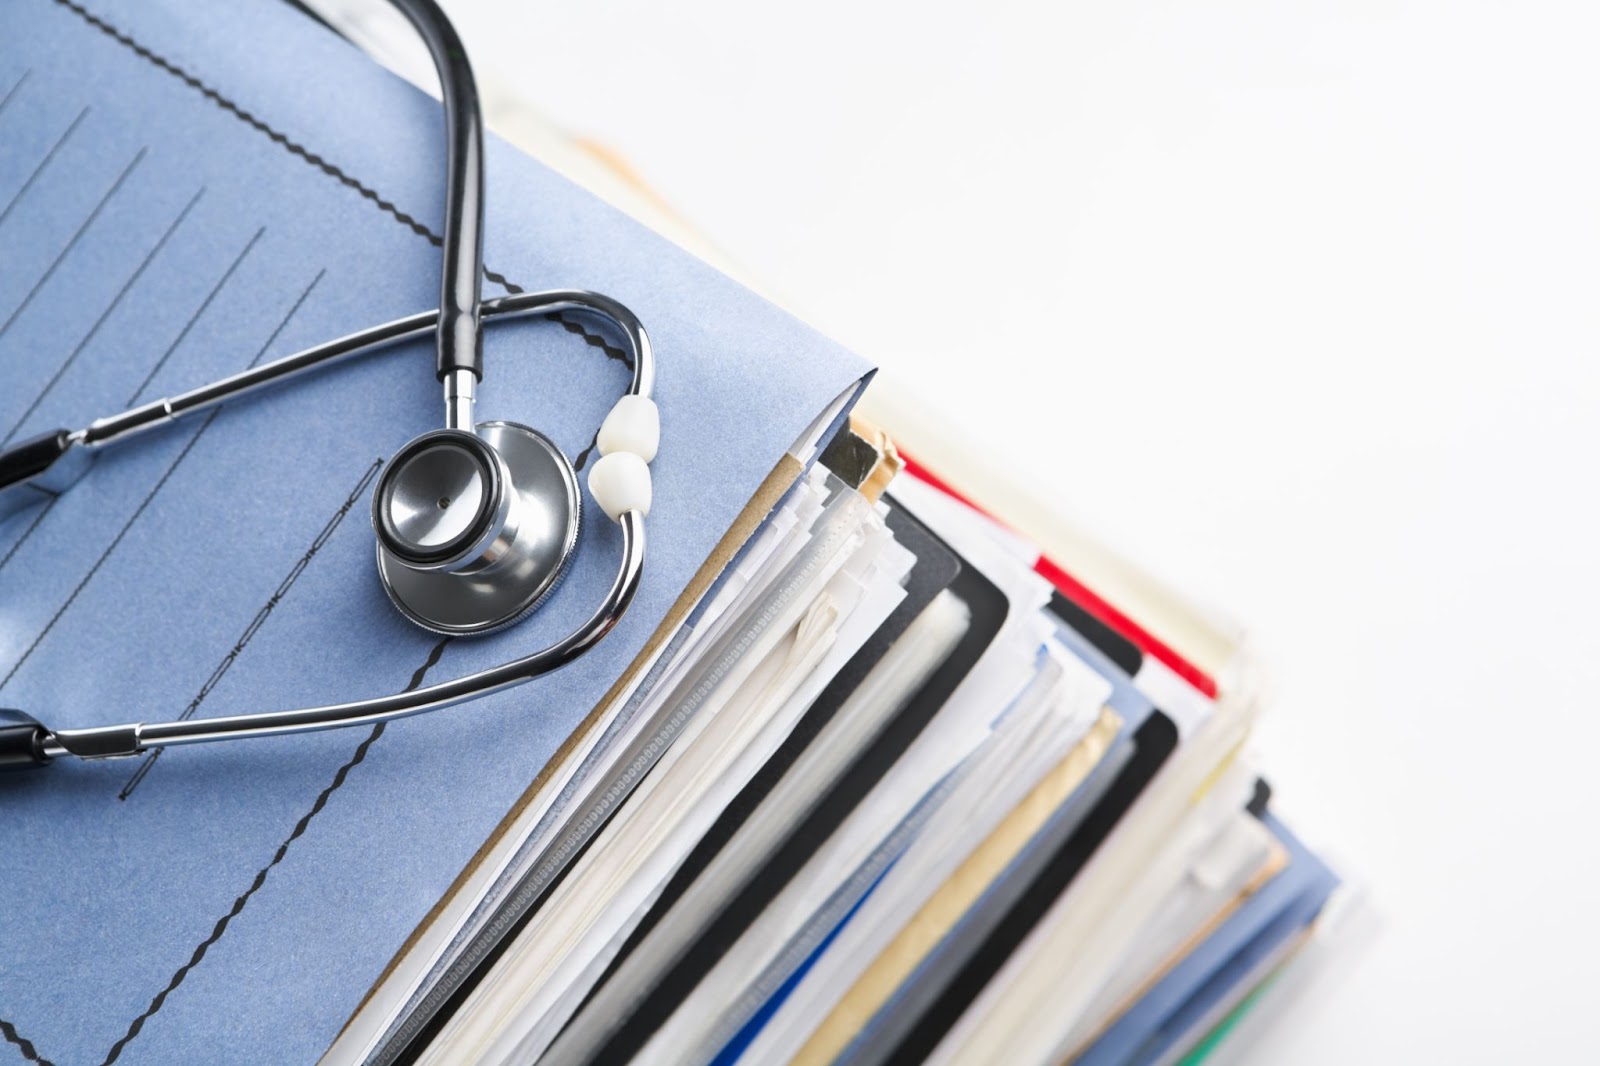 Health Care Data is Not a Proxy for Complete Medical Information